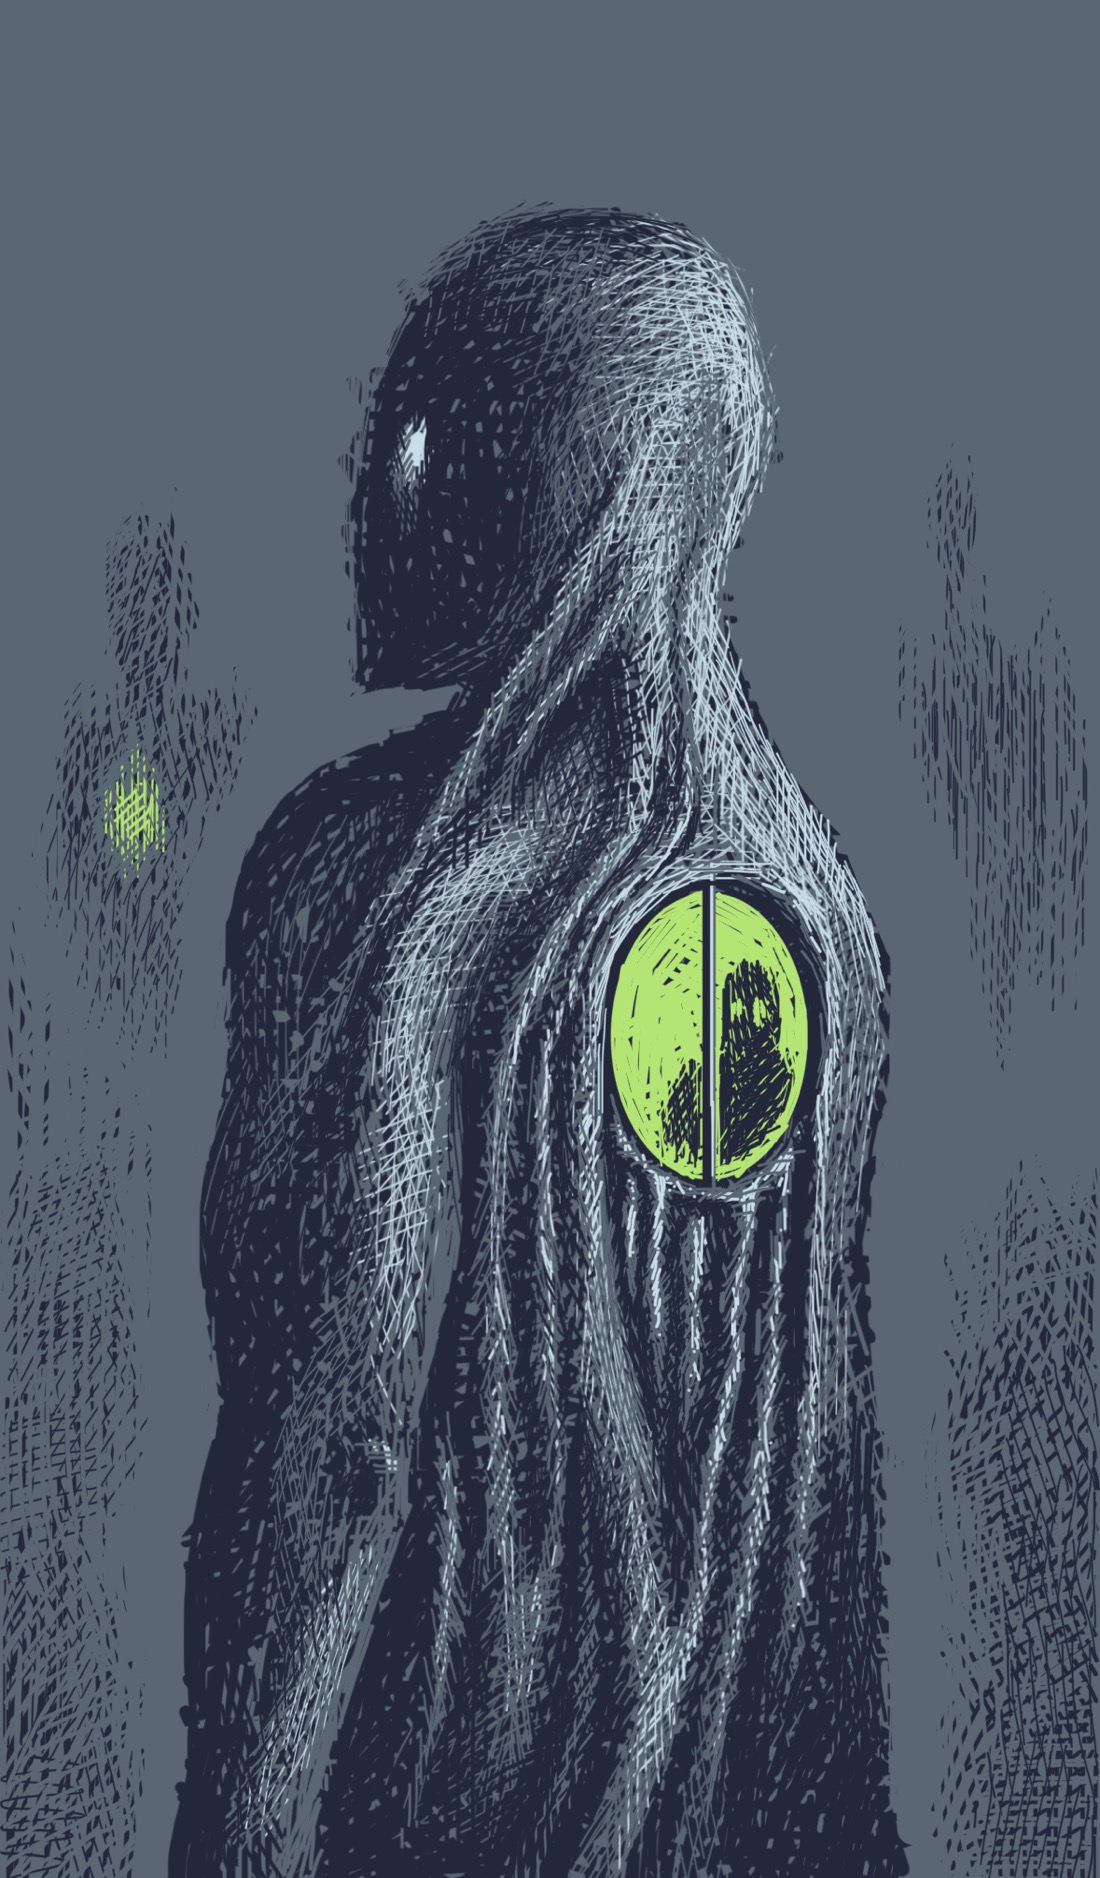 A humanoid figure with its back facing us. The profile of its face is visible; one eye glows white. The figure is strangely sinewed, almost as though it is a machine. In the center of its back is a round, green window, through which a shadowy figure looks. Blurry silhouettes in the background suggest numerous similar figures, also with glowing windows on them.